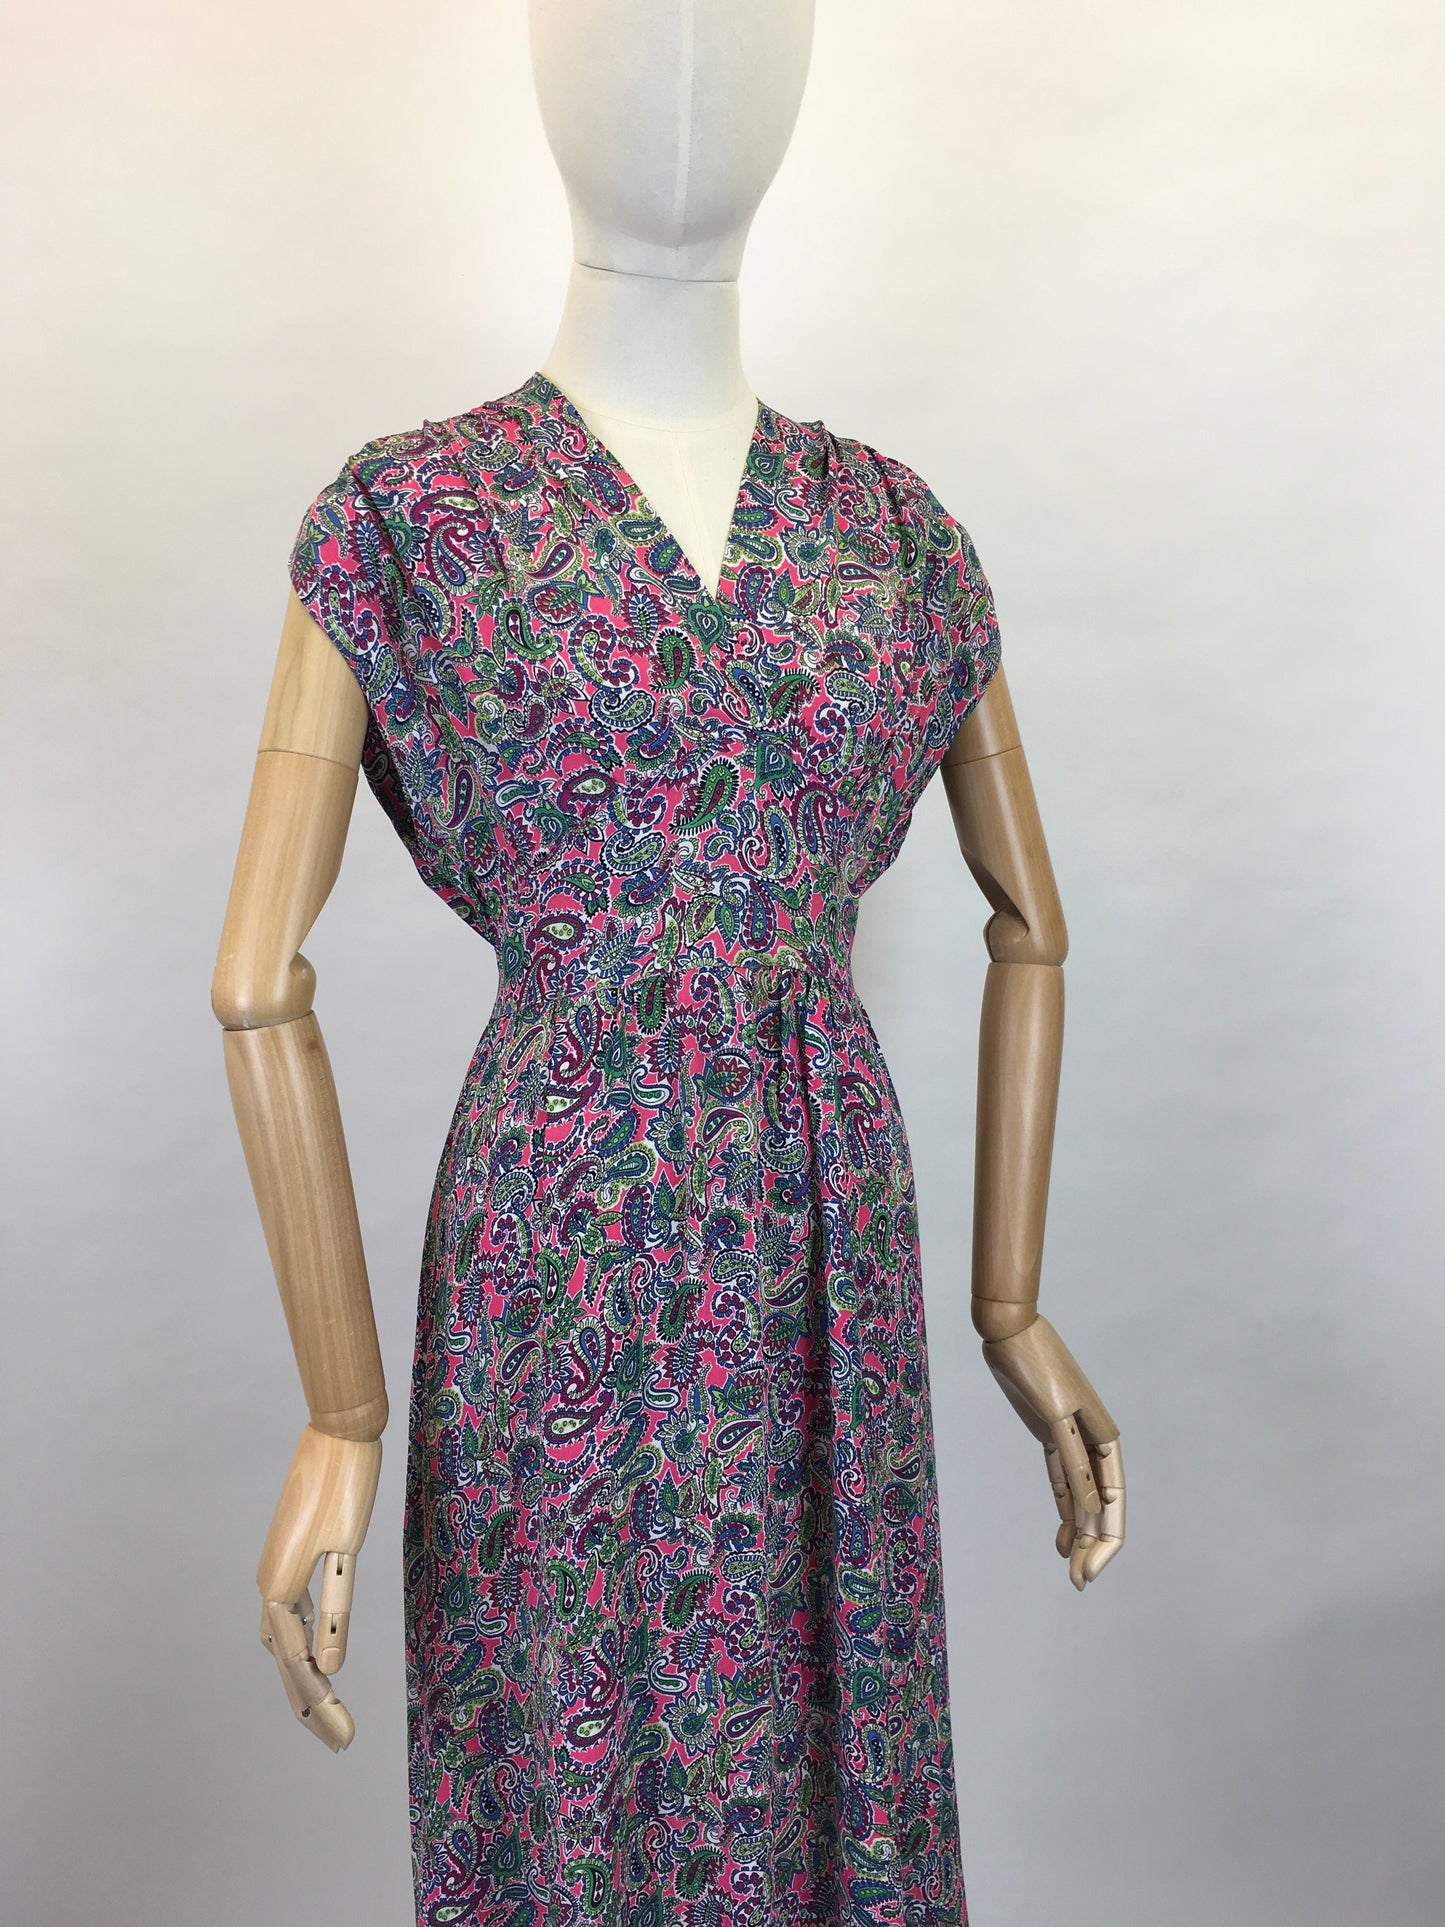 Original Late 1940s Day Dress - In a Beautiful Bright Paisley Rayon Crepe